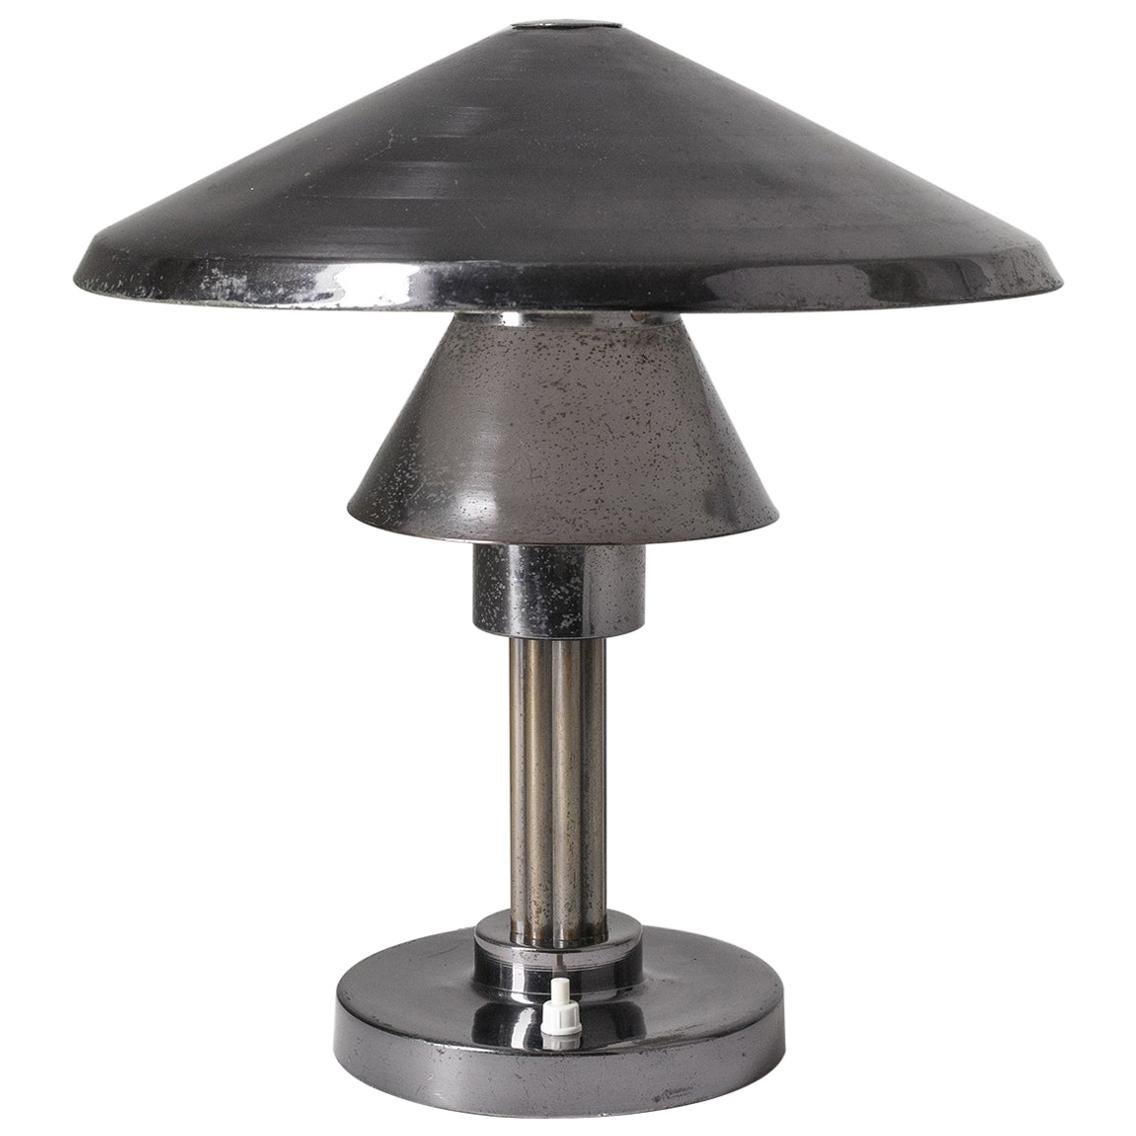 Italian Desk Lamp, 1950s, Patinated Nickel For Sale